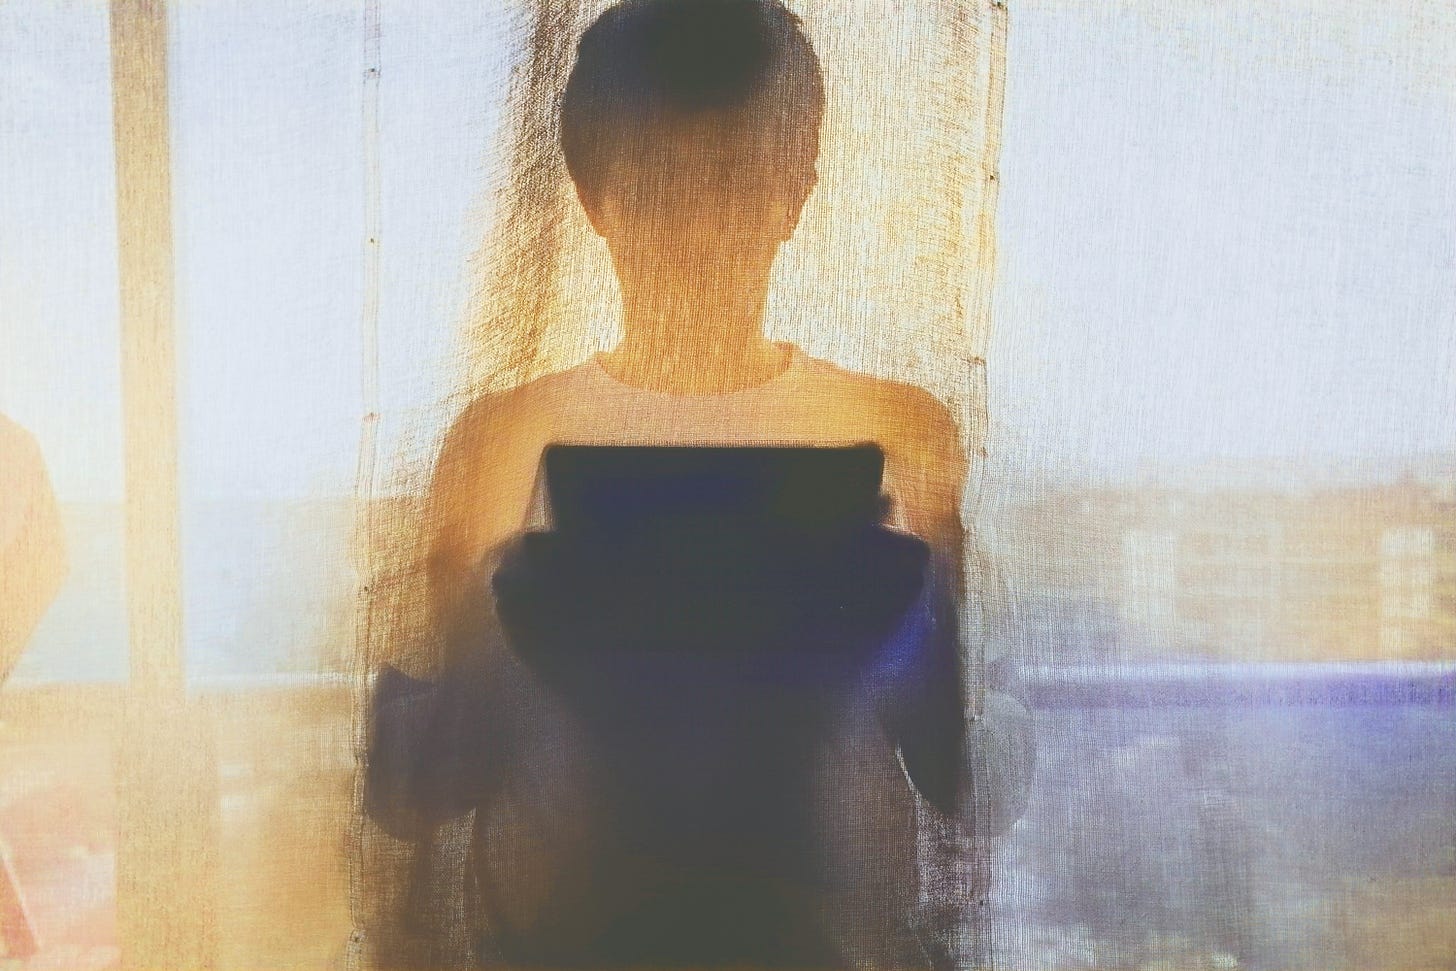 A silhouette is hiding behind the curtains, with a tablet on their hands.